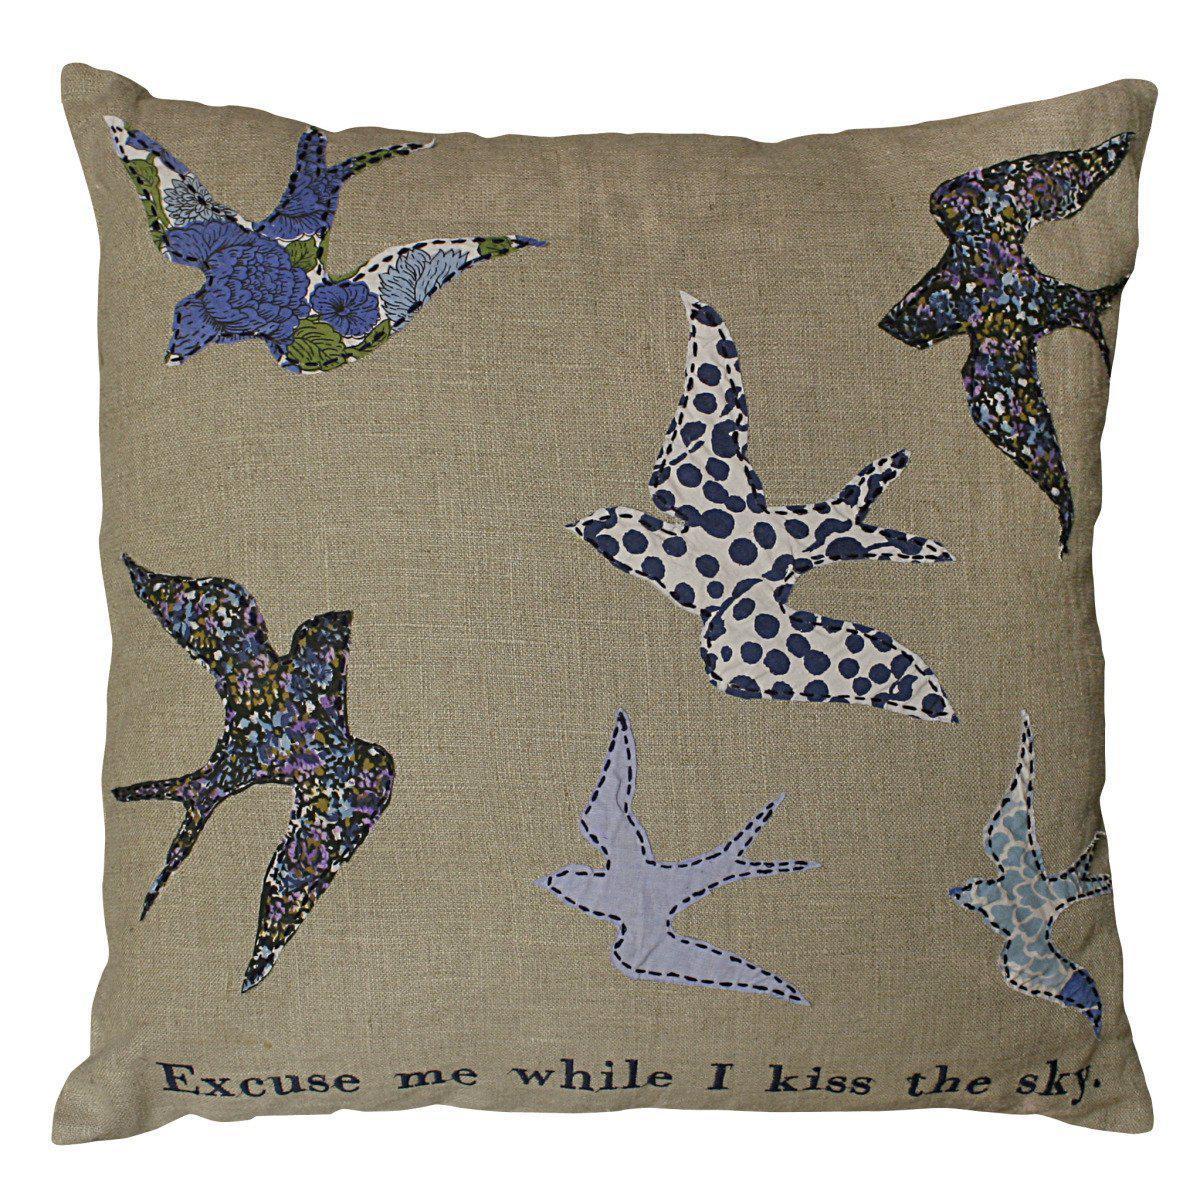 Sugarboo Designs Excuse Me While I Kiss The Sky Pillow